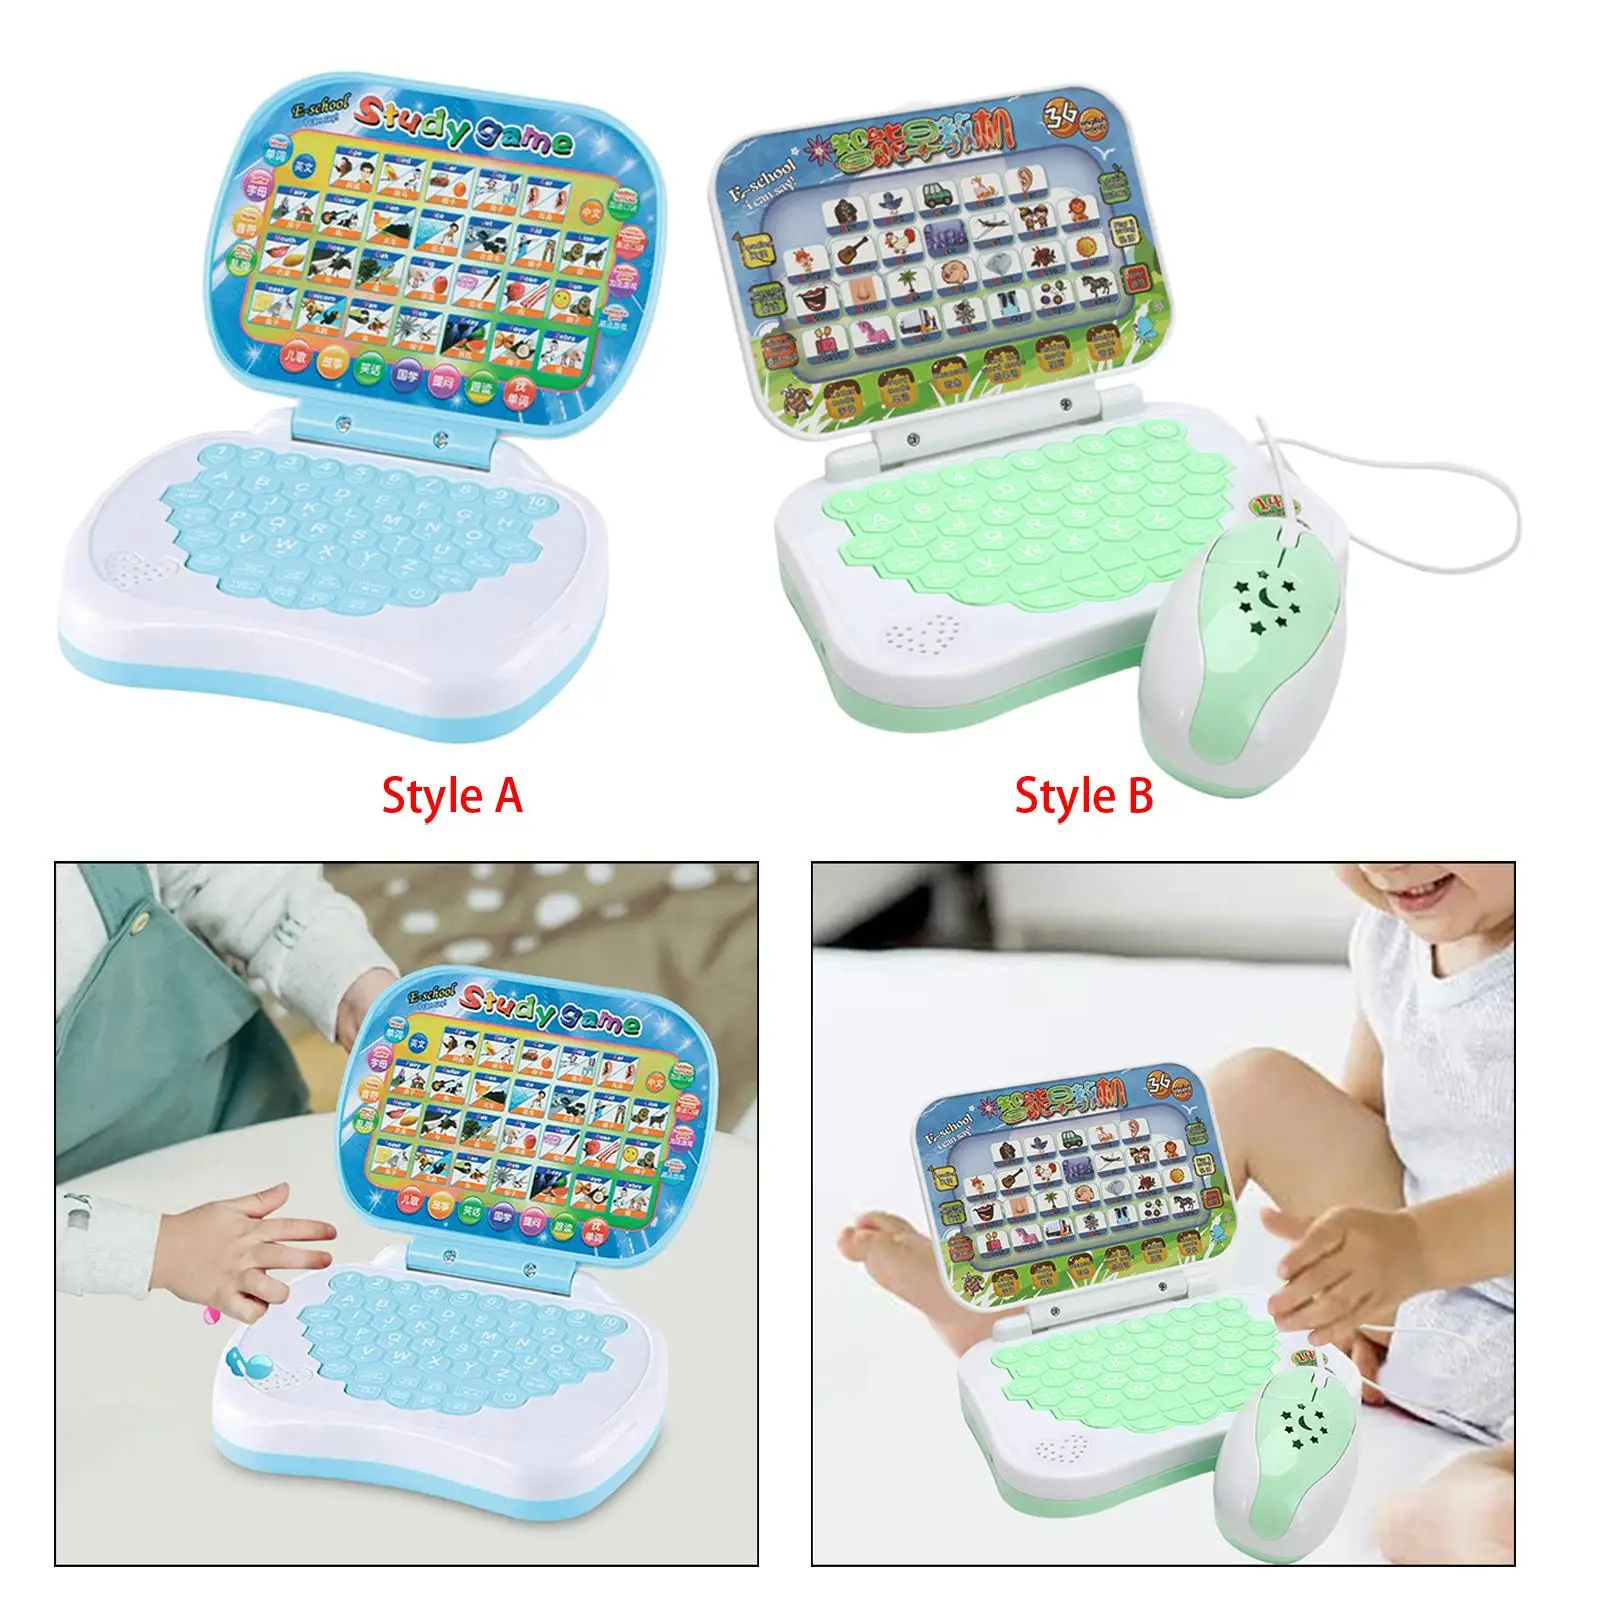 Handheld Language Learning Machine Child Interactive Learning Pad Tablet for Children Toddler Girls Boys Bithday Gifts